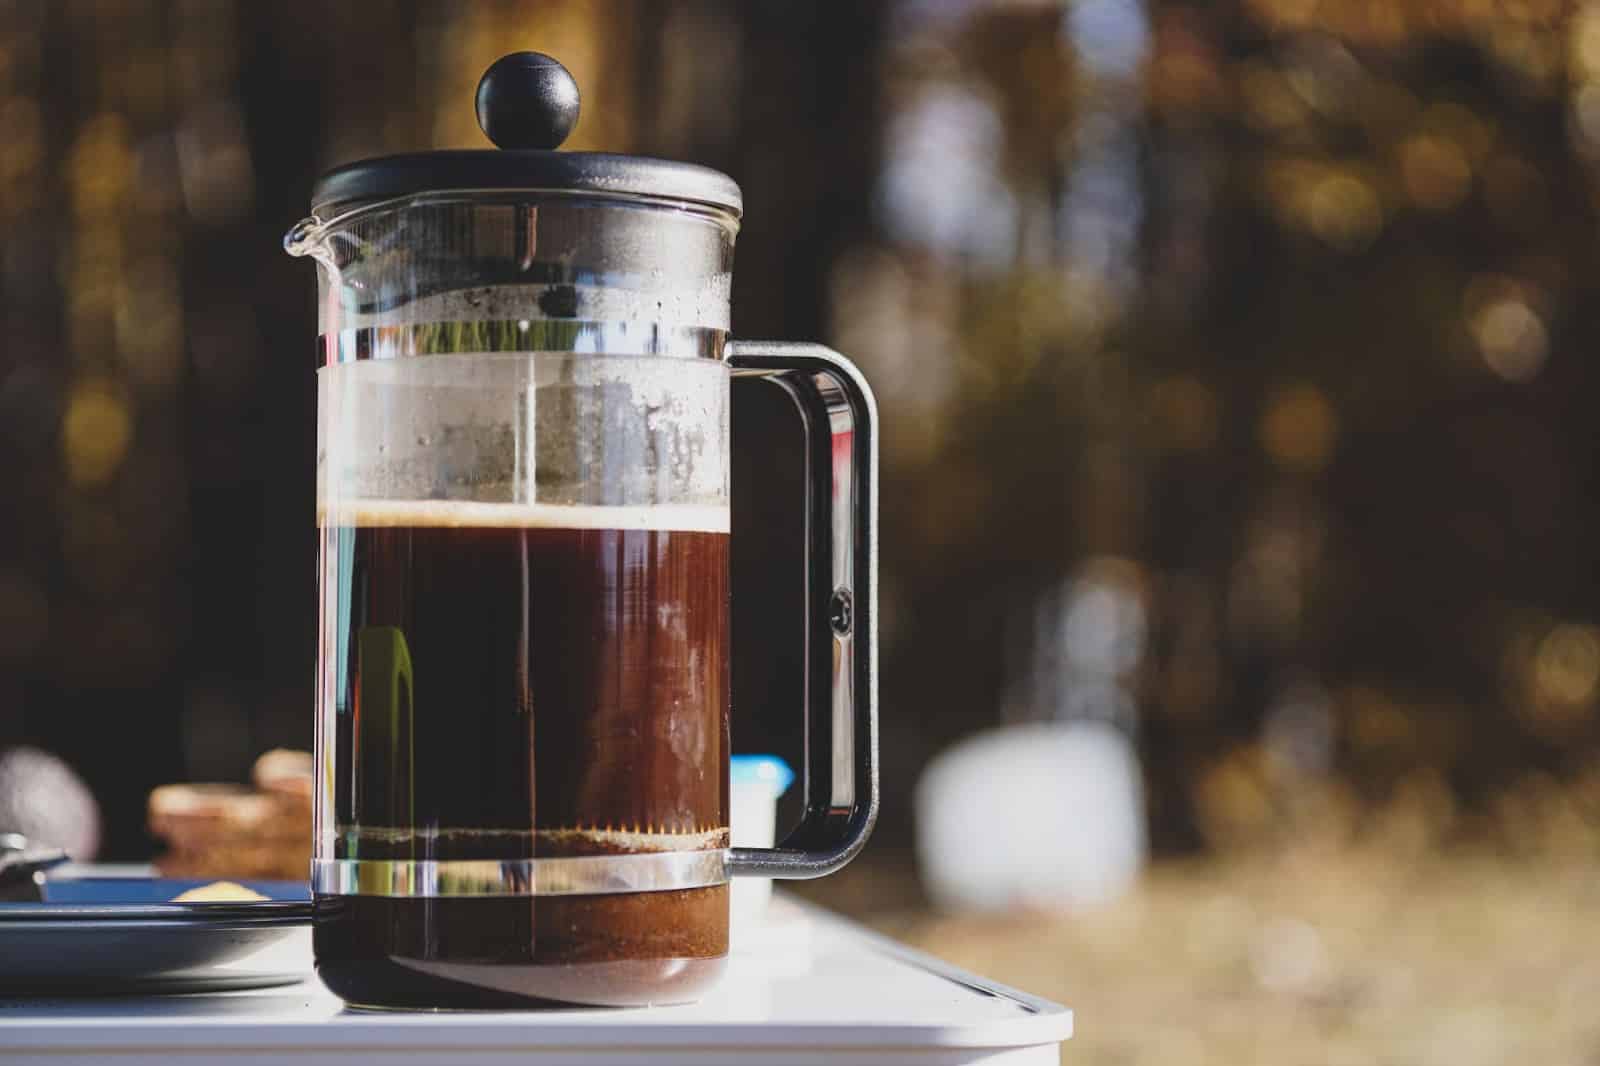 Full Guide to Making French Press Coffee